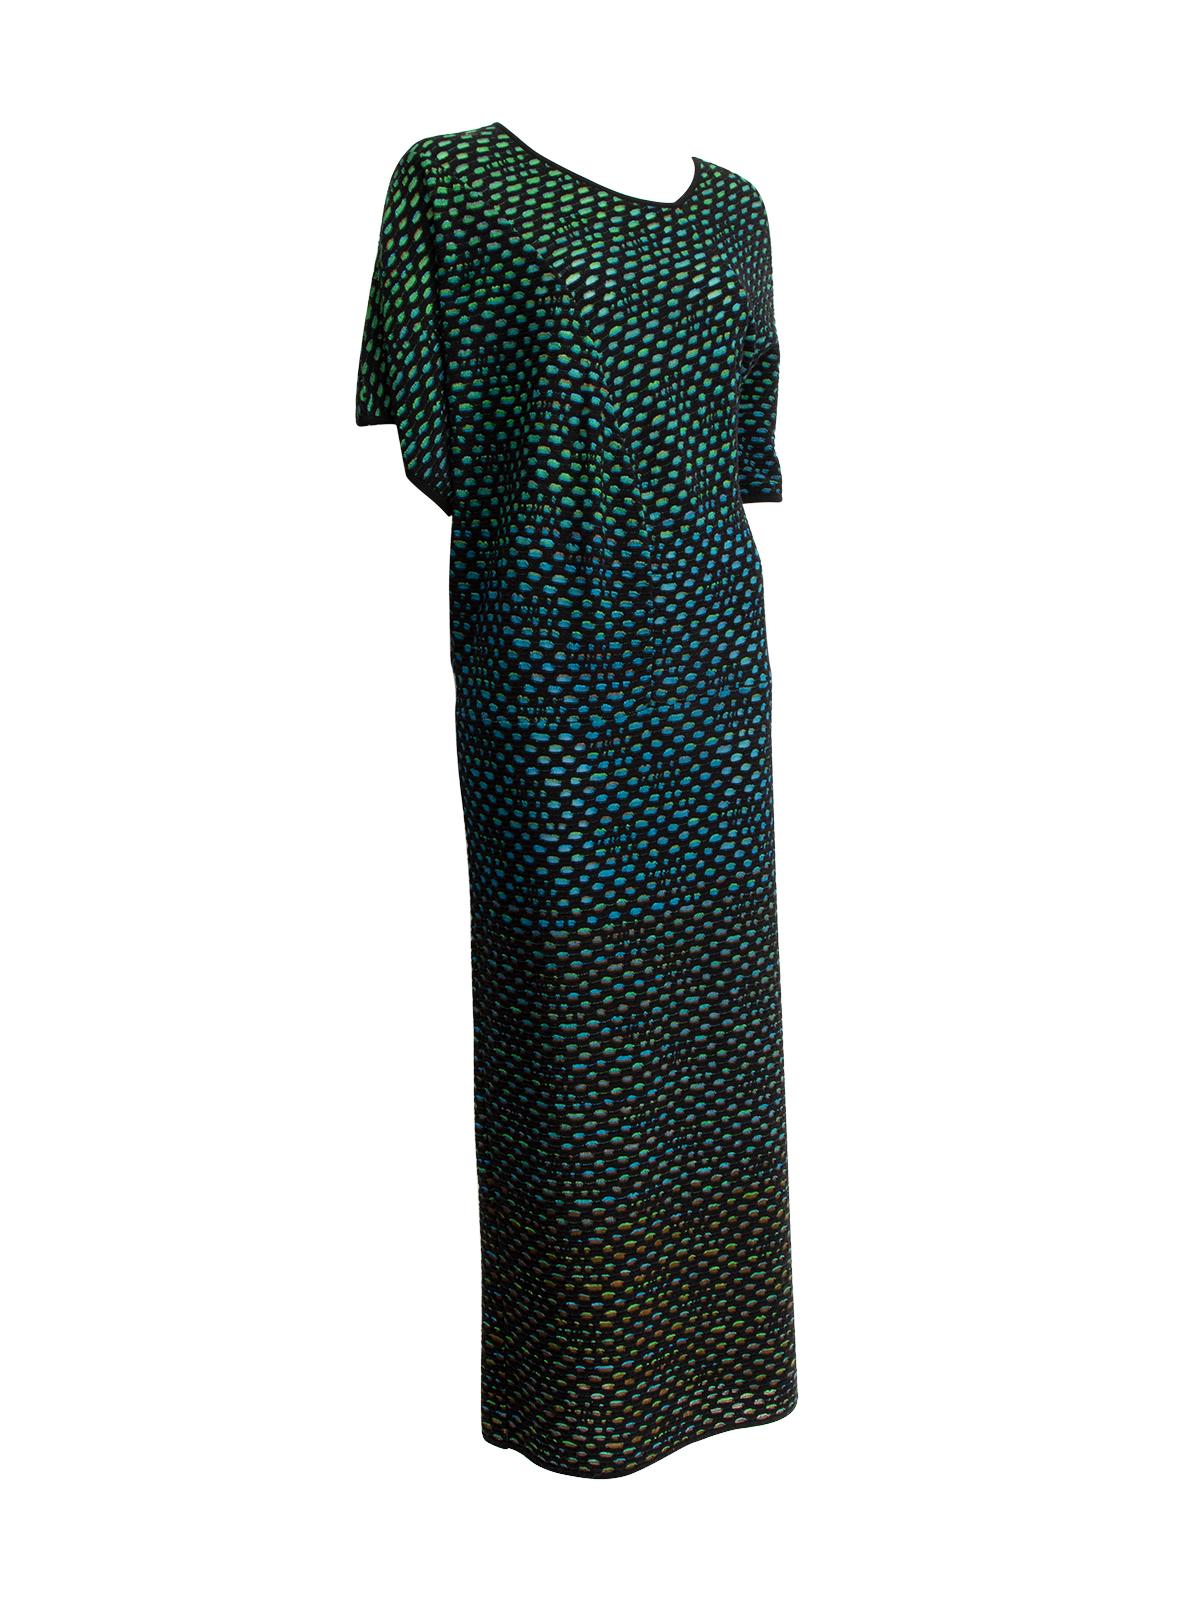 CONDITION is Very good. Minimal wear to dress is evident. Minimal piling and loose threads seen on this used Missoni designer resale item. Details Multicolor Batwing Round neck Maxi Knit Viscose Made in Romania Composition 56% (viscose), 17%